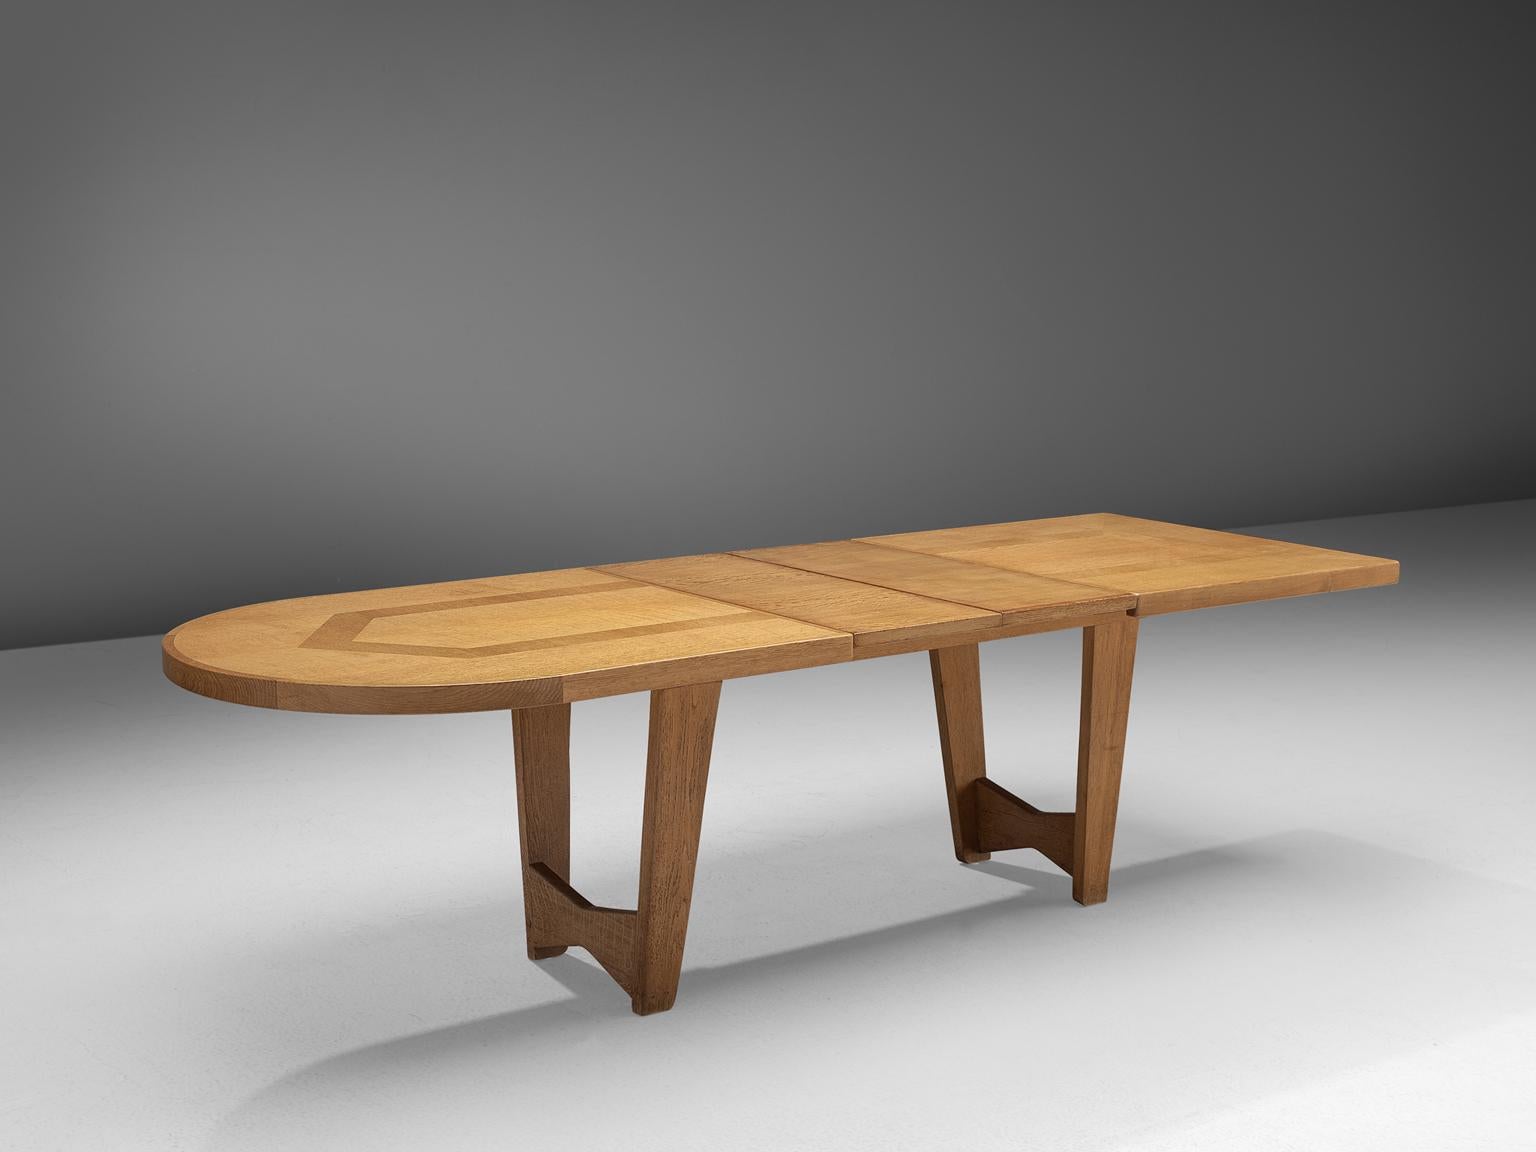 Guillerme et Chambron for Votre Maison, dining table, oak, France, 1960s.

This extendable dining table, designed by Guillerme et Chambron, features one rounded side and two extra leaves. The table to is inlayed with a subtle pattern made of